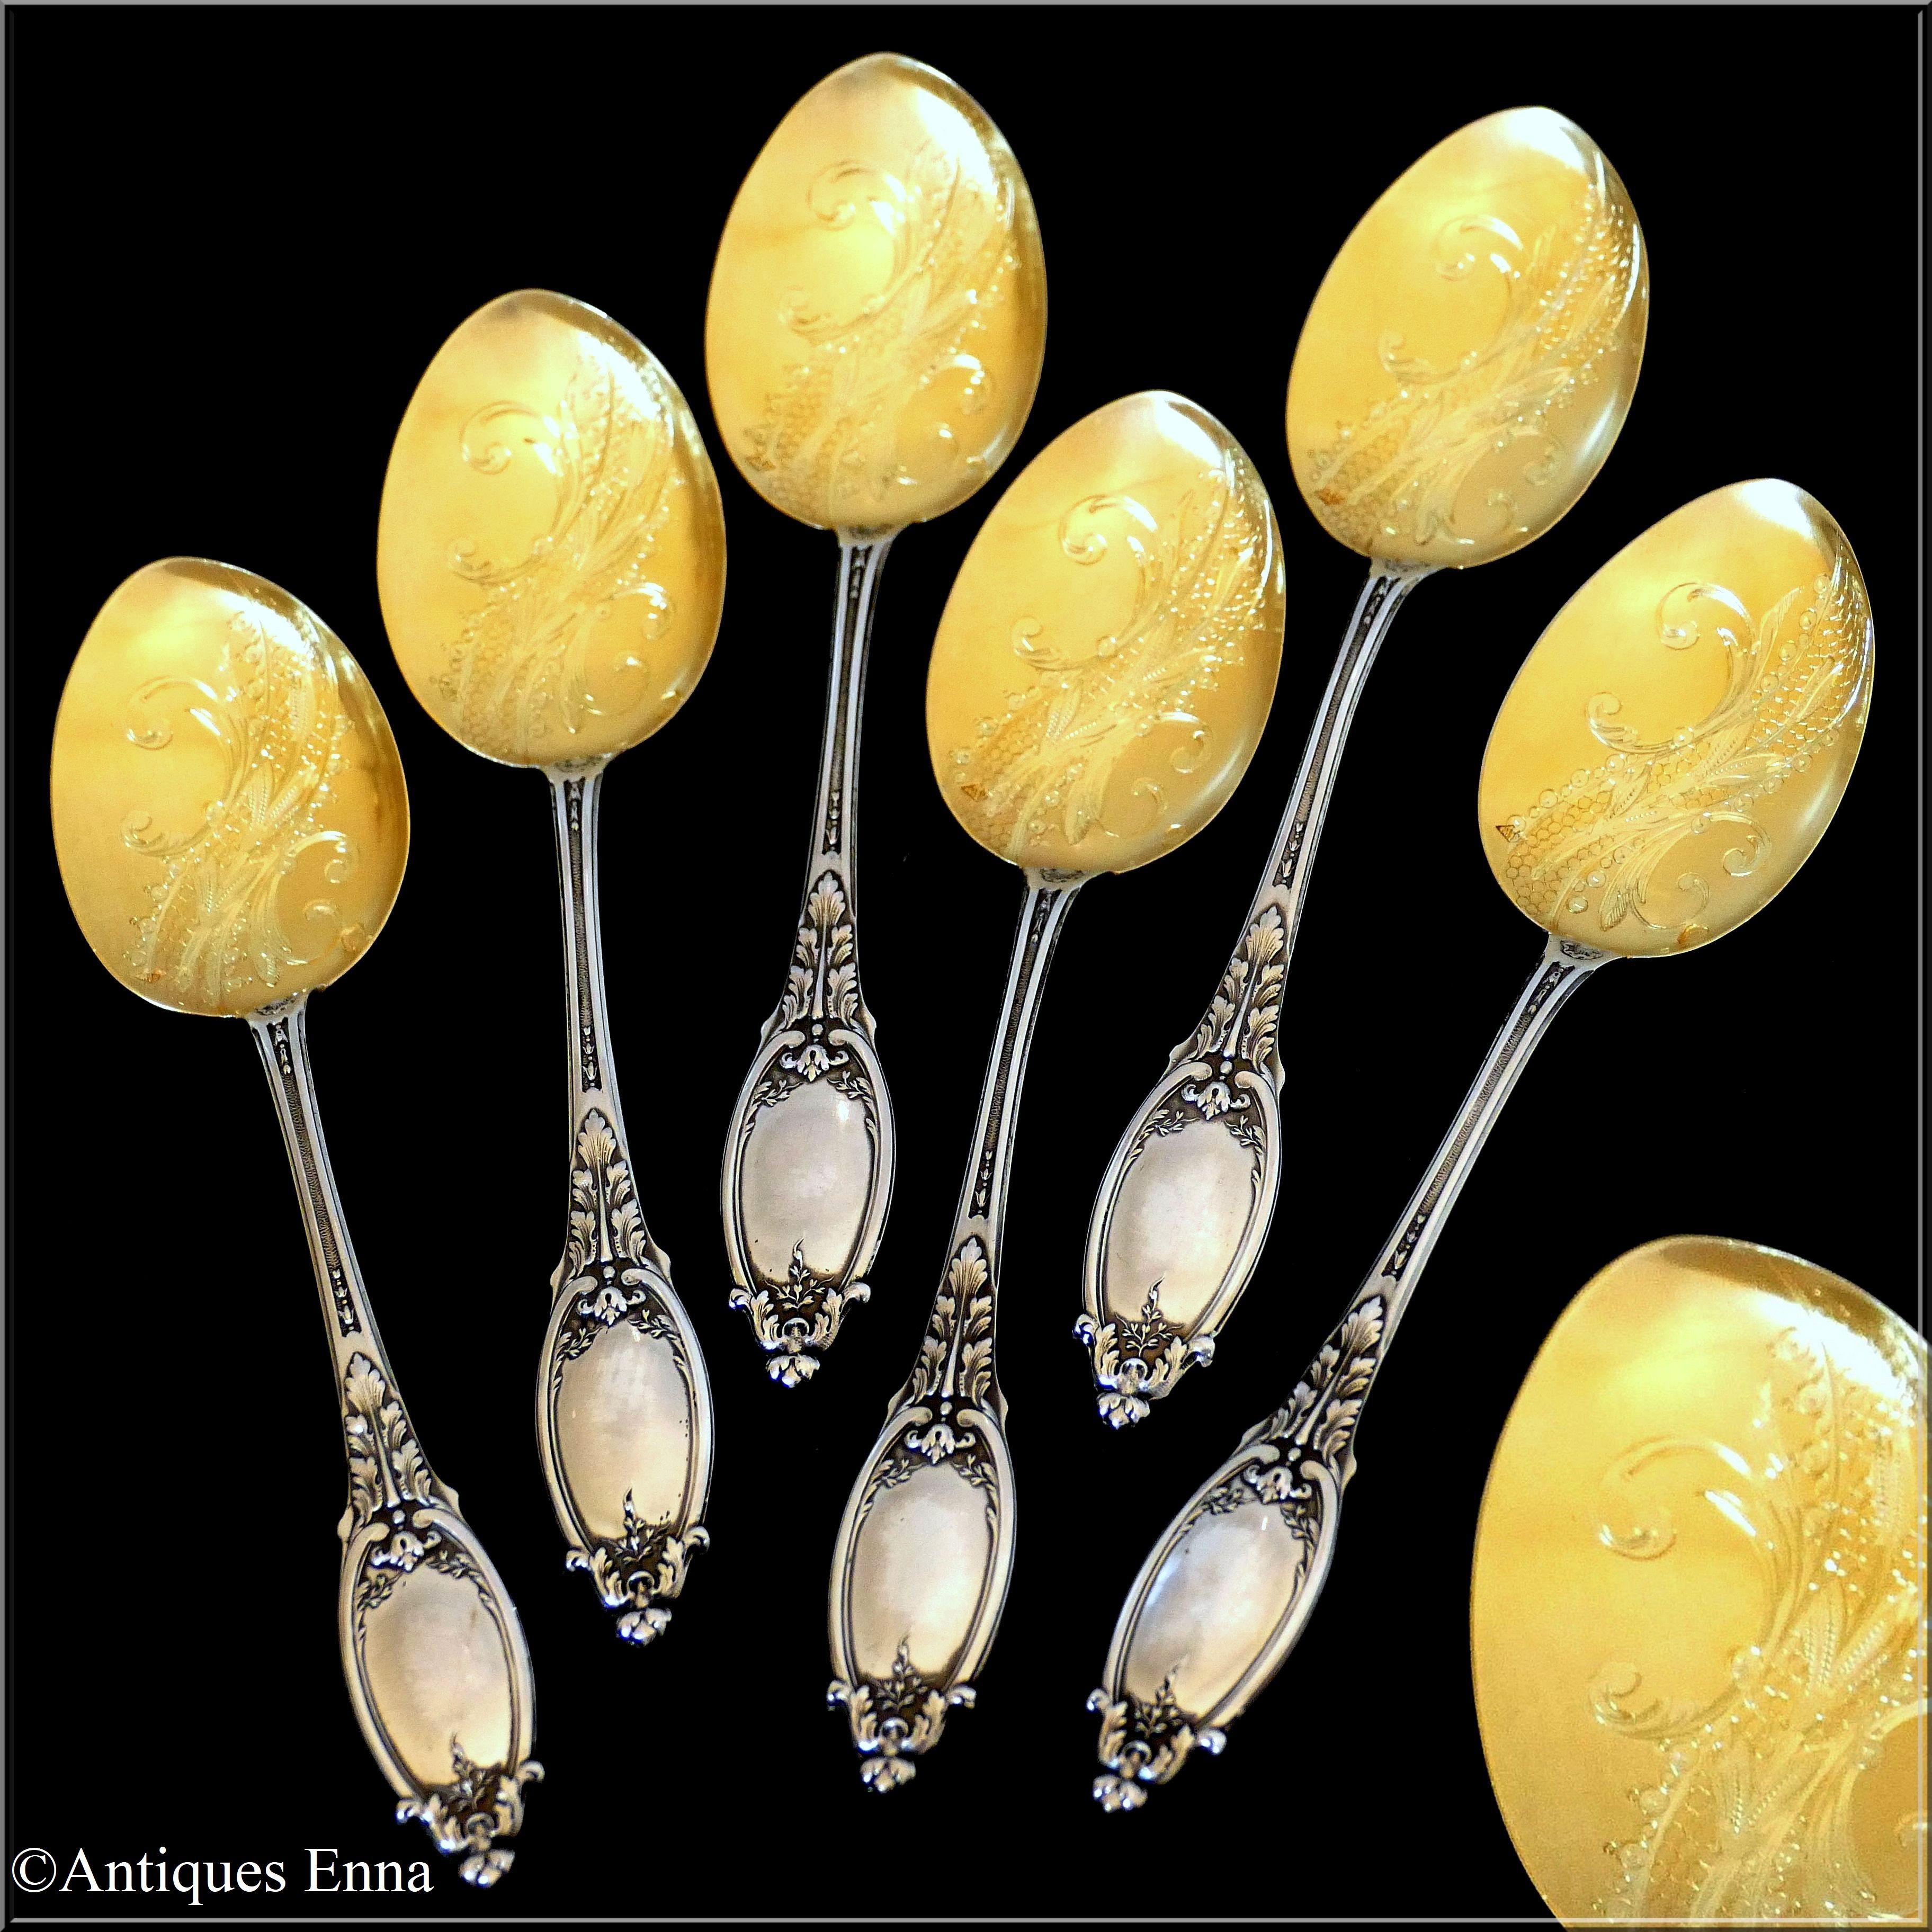 Six ice cream spoons of truly exceptional quality, for the richness of their neoclassical decoration, their form and sculpting. No monograms. 

Prestigious silversmiths:
Maillard Freres - Vazou
113 rue de Turenne - Paris
They were active from